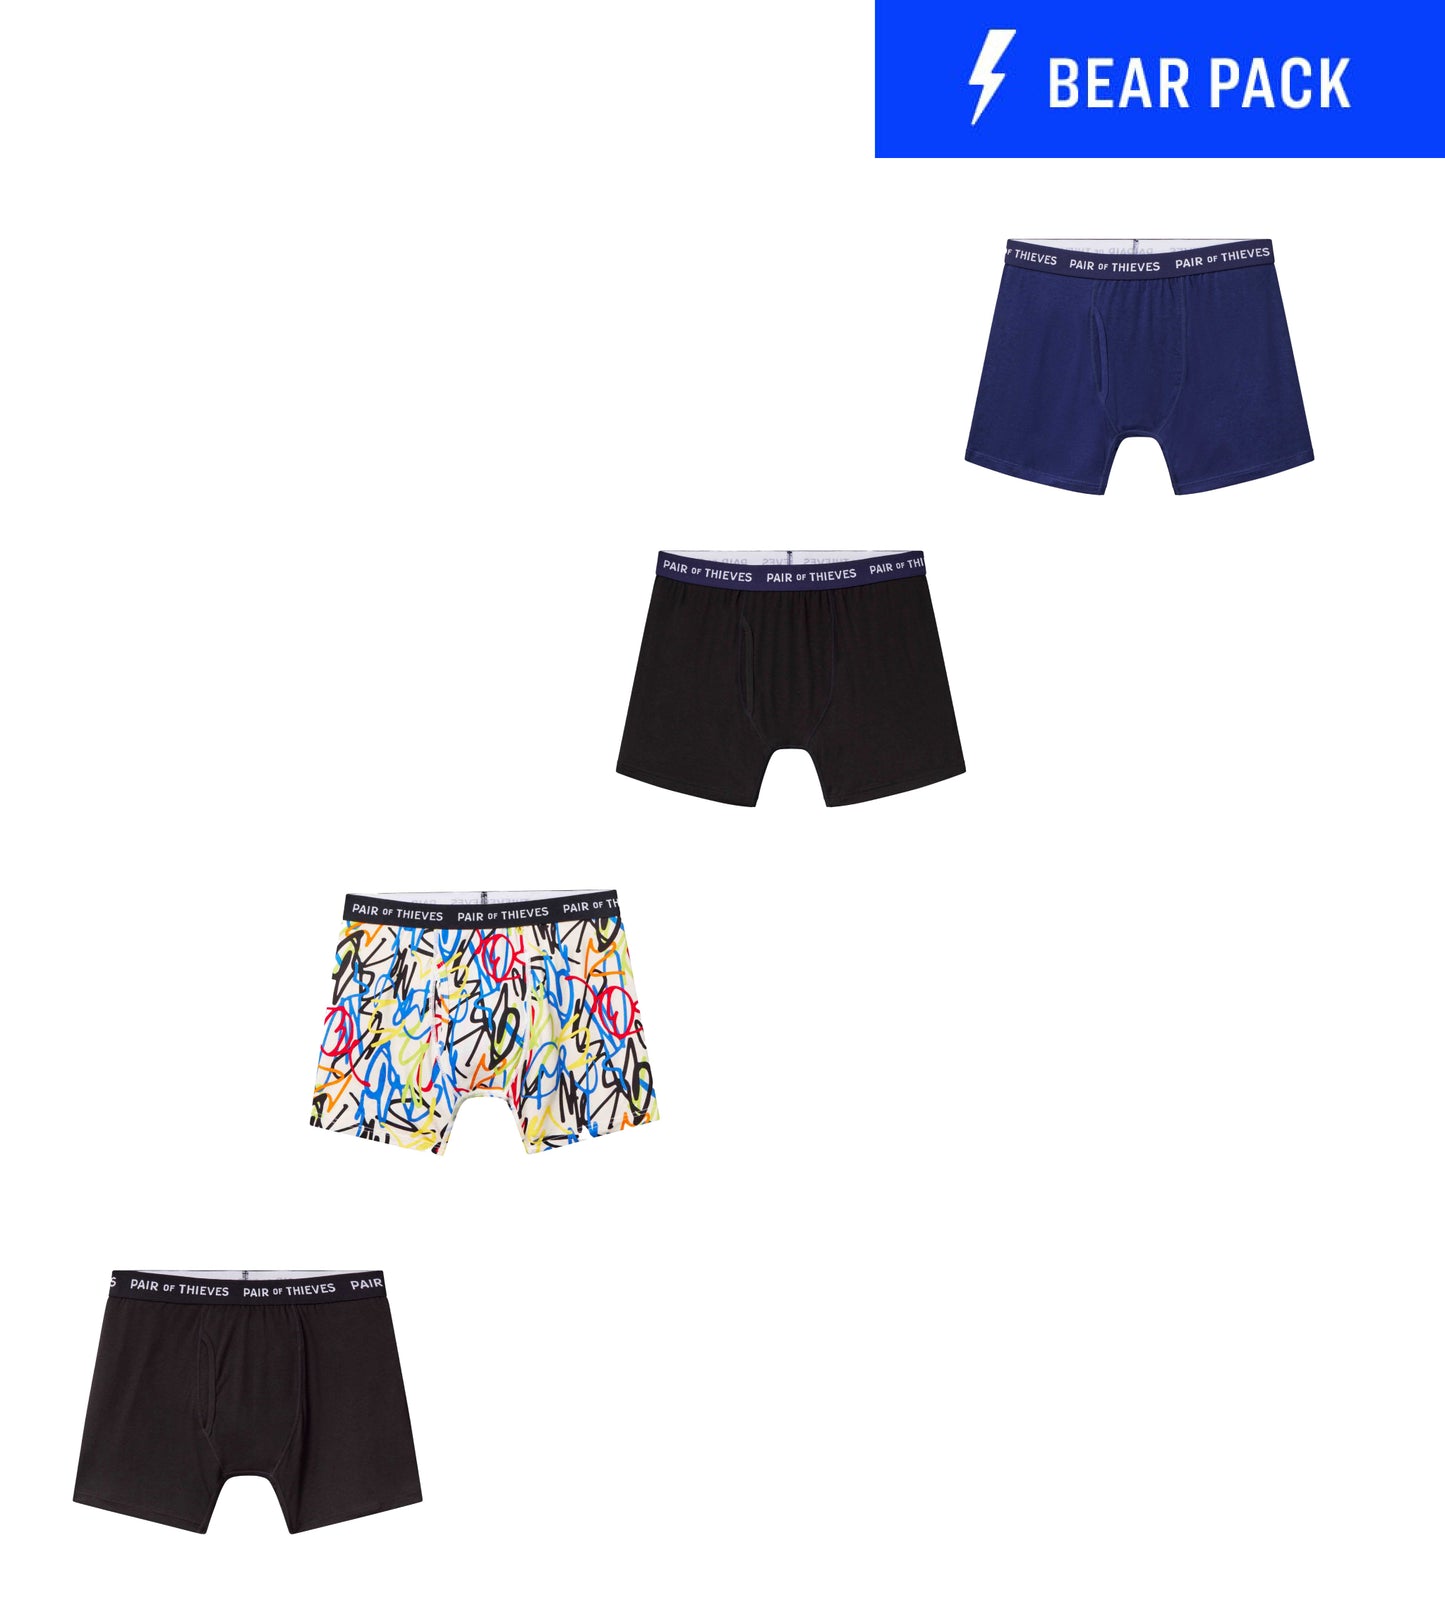 Pair of Thieves Men's Exclusive Super Soft 3 Pack Trunks, Short